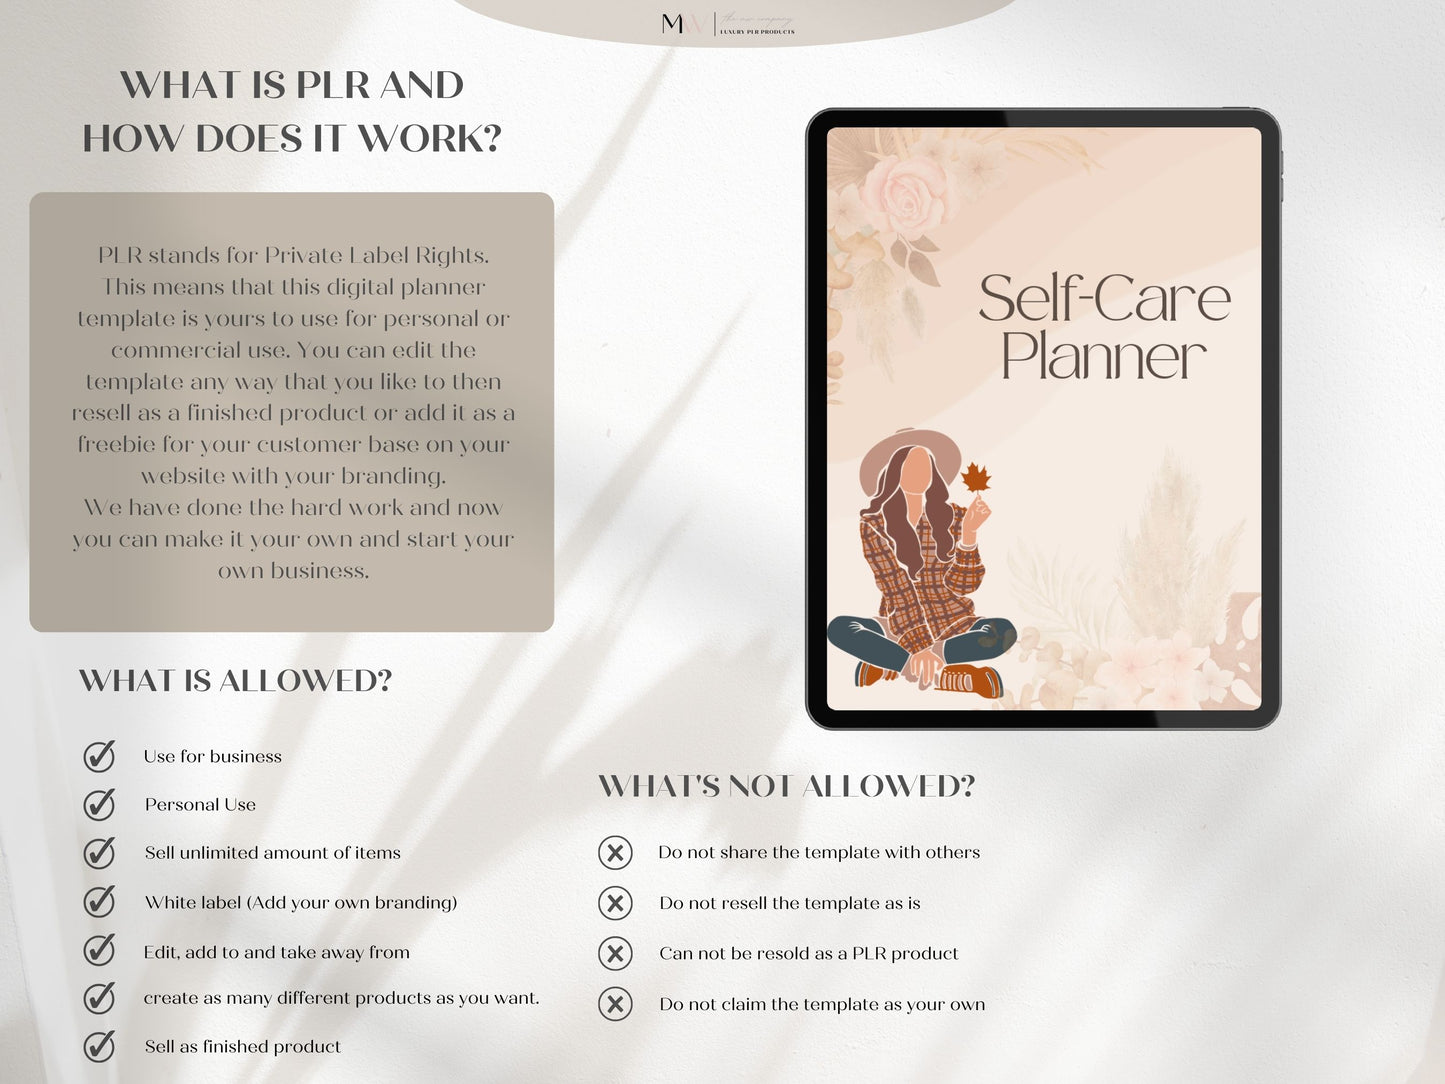 This shows what plr is and what you can do with the product.The image shows the self-care planner with a girl sitting with fall leaves.It can be used in Goodnotes and edited to look how you want.